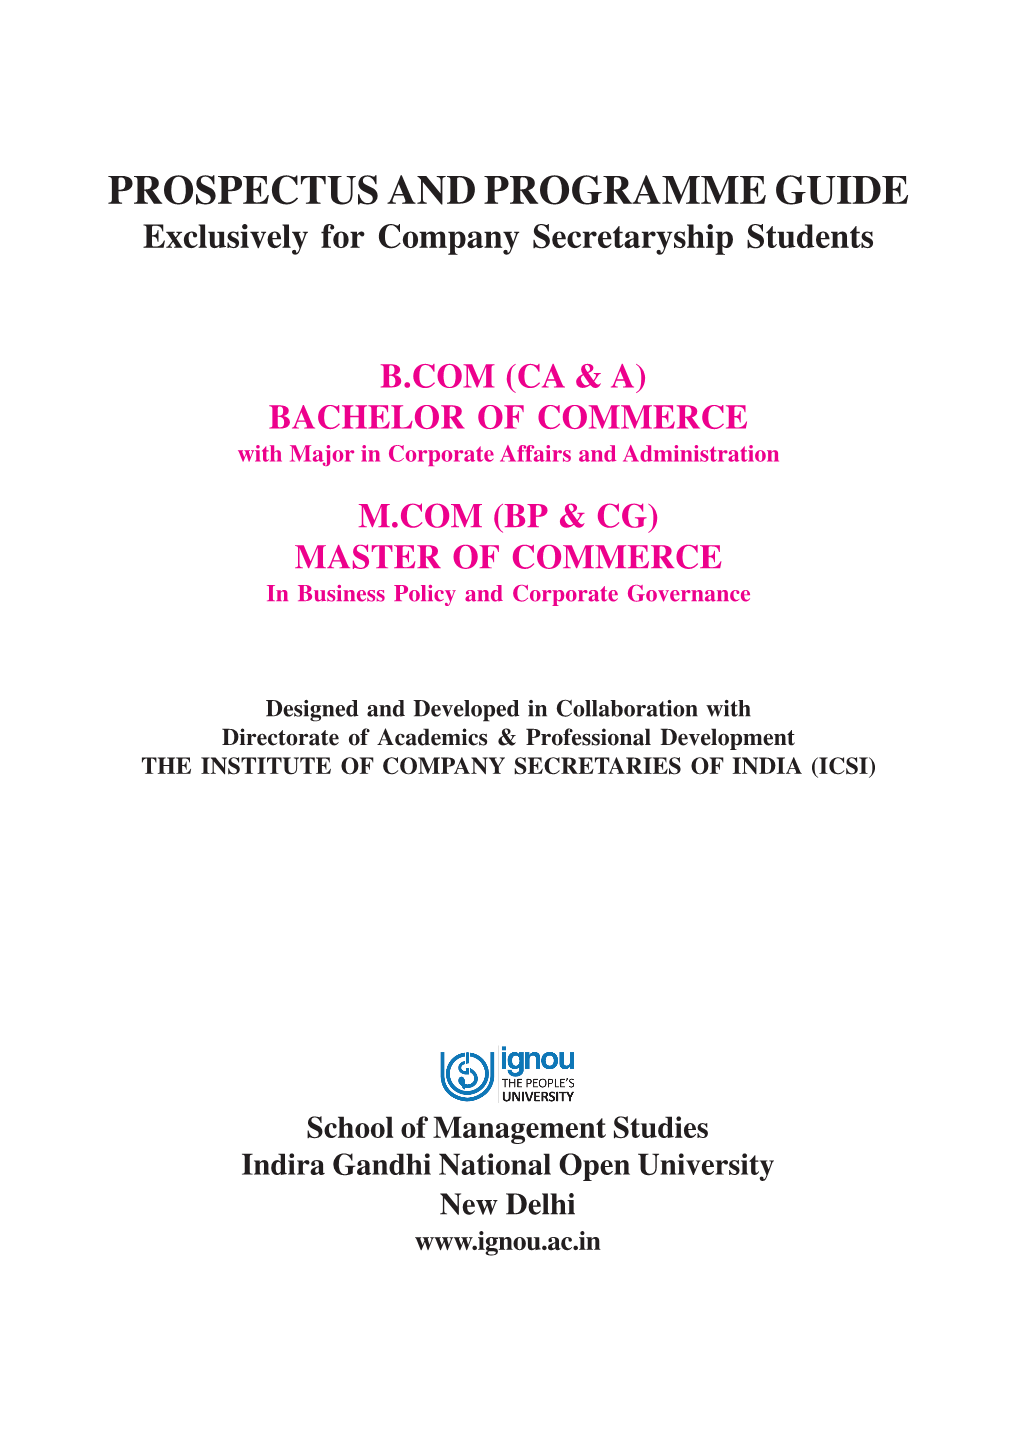 PROSPECTUS and PROGRAMME GUIDE Exclusively for Company Secretaryship Students